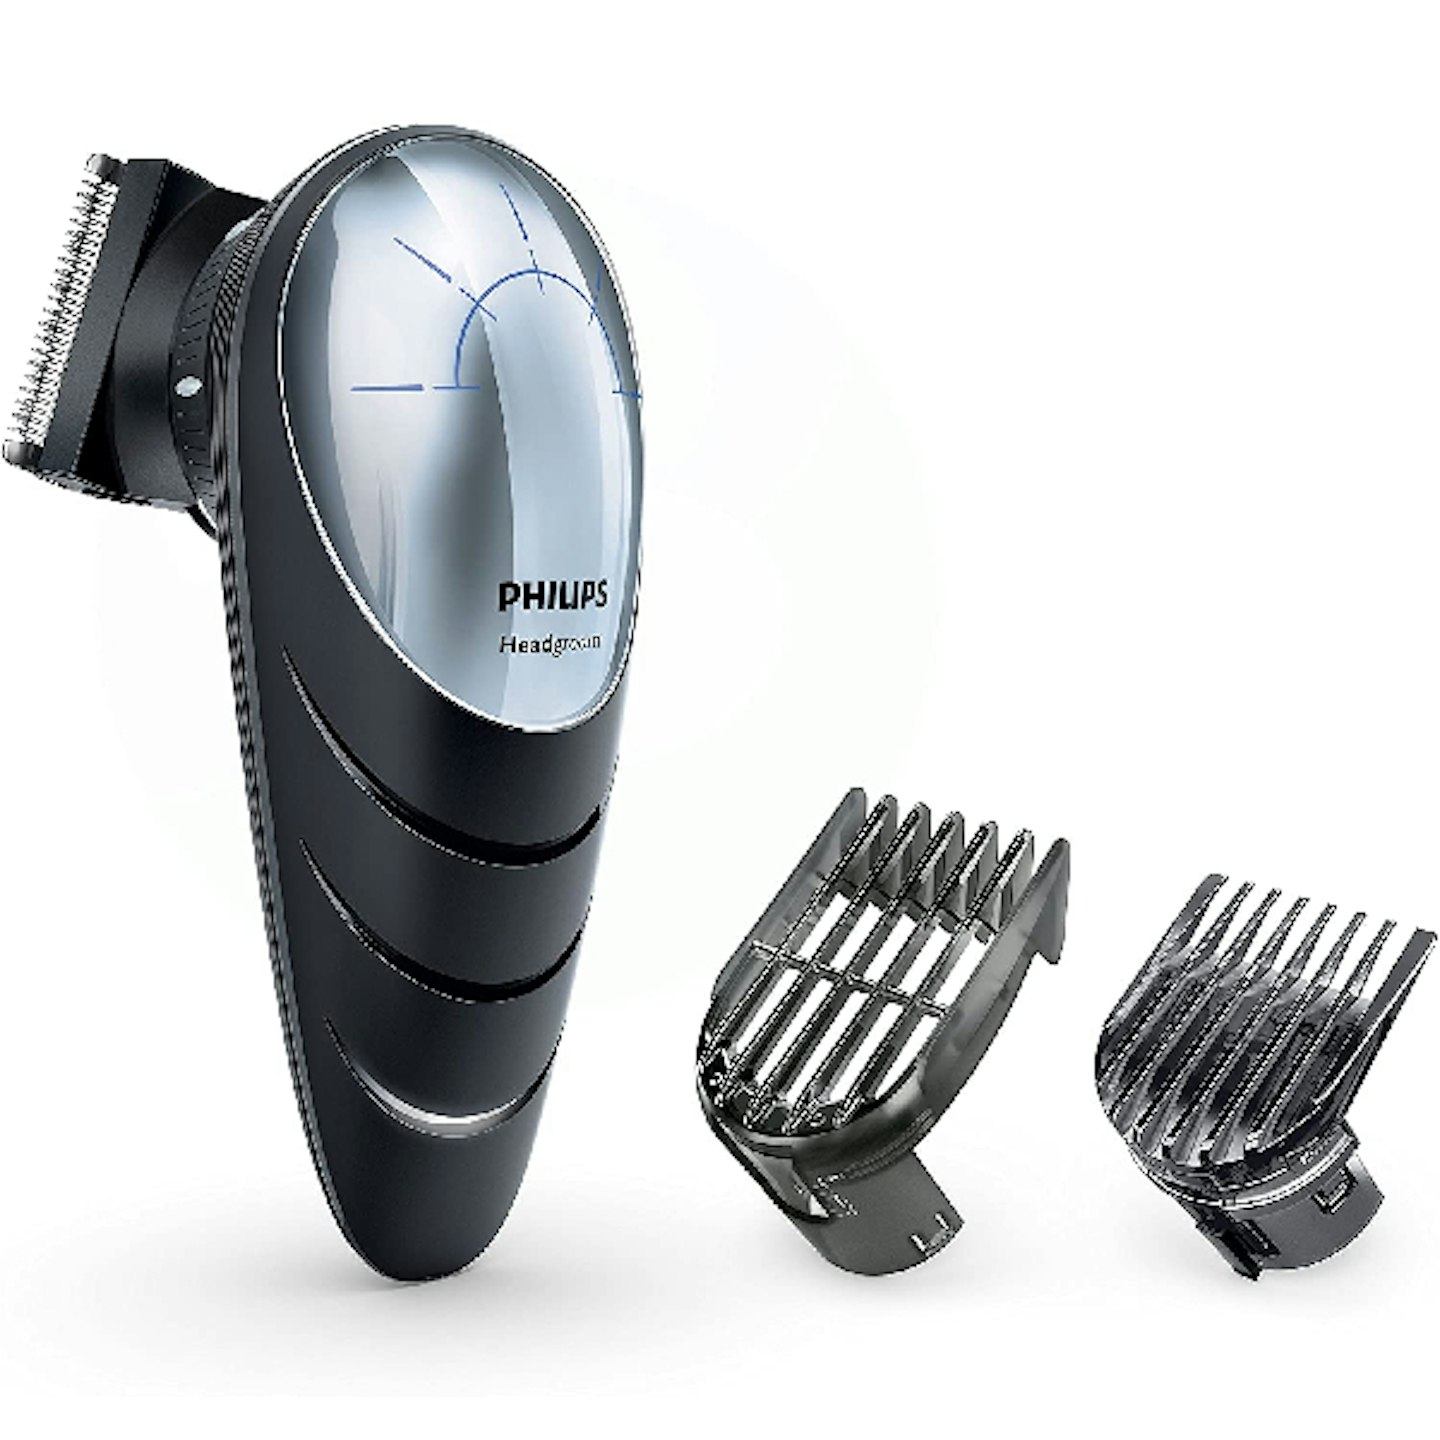 phillips Philips Hair Clippers, Do-It-Yourself Hair Clipper